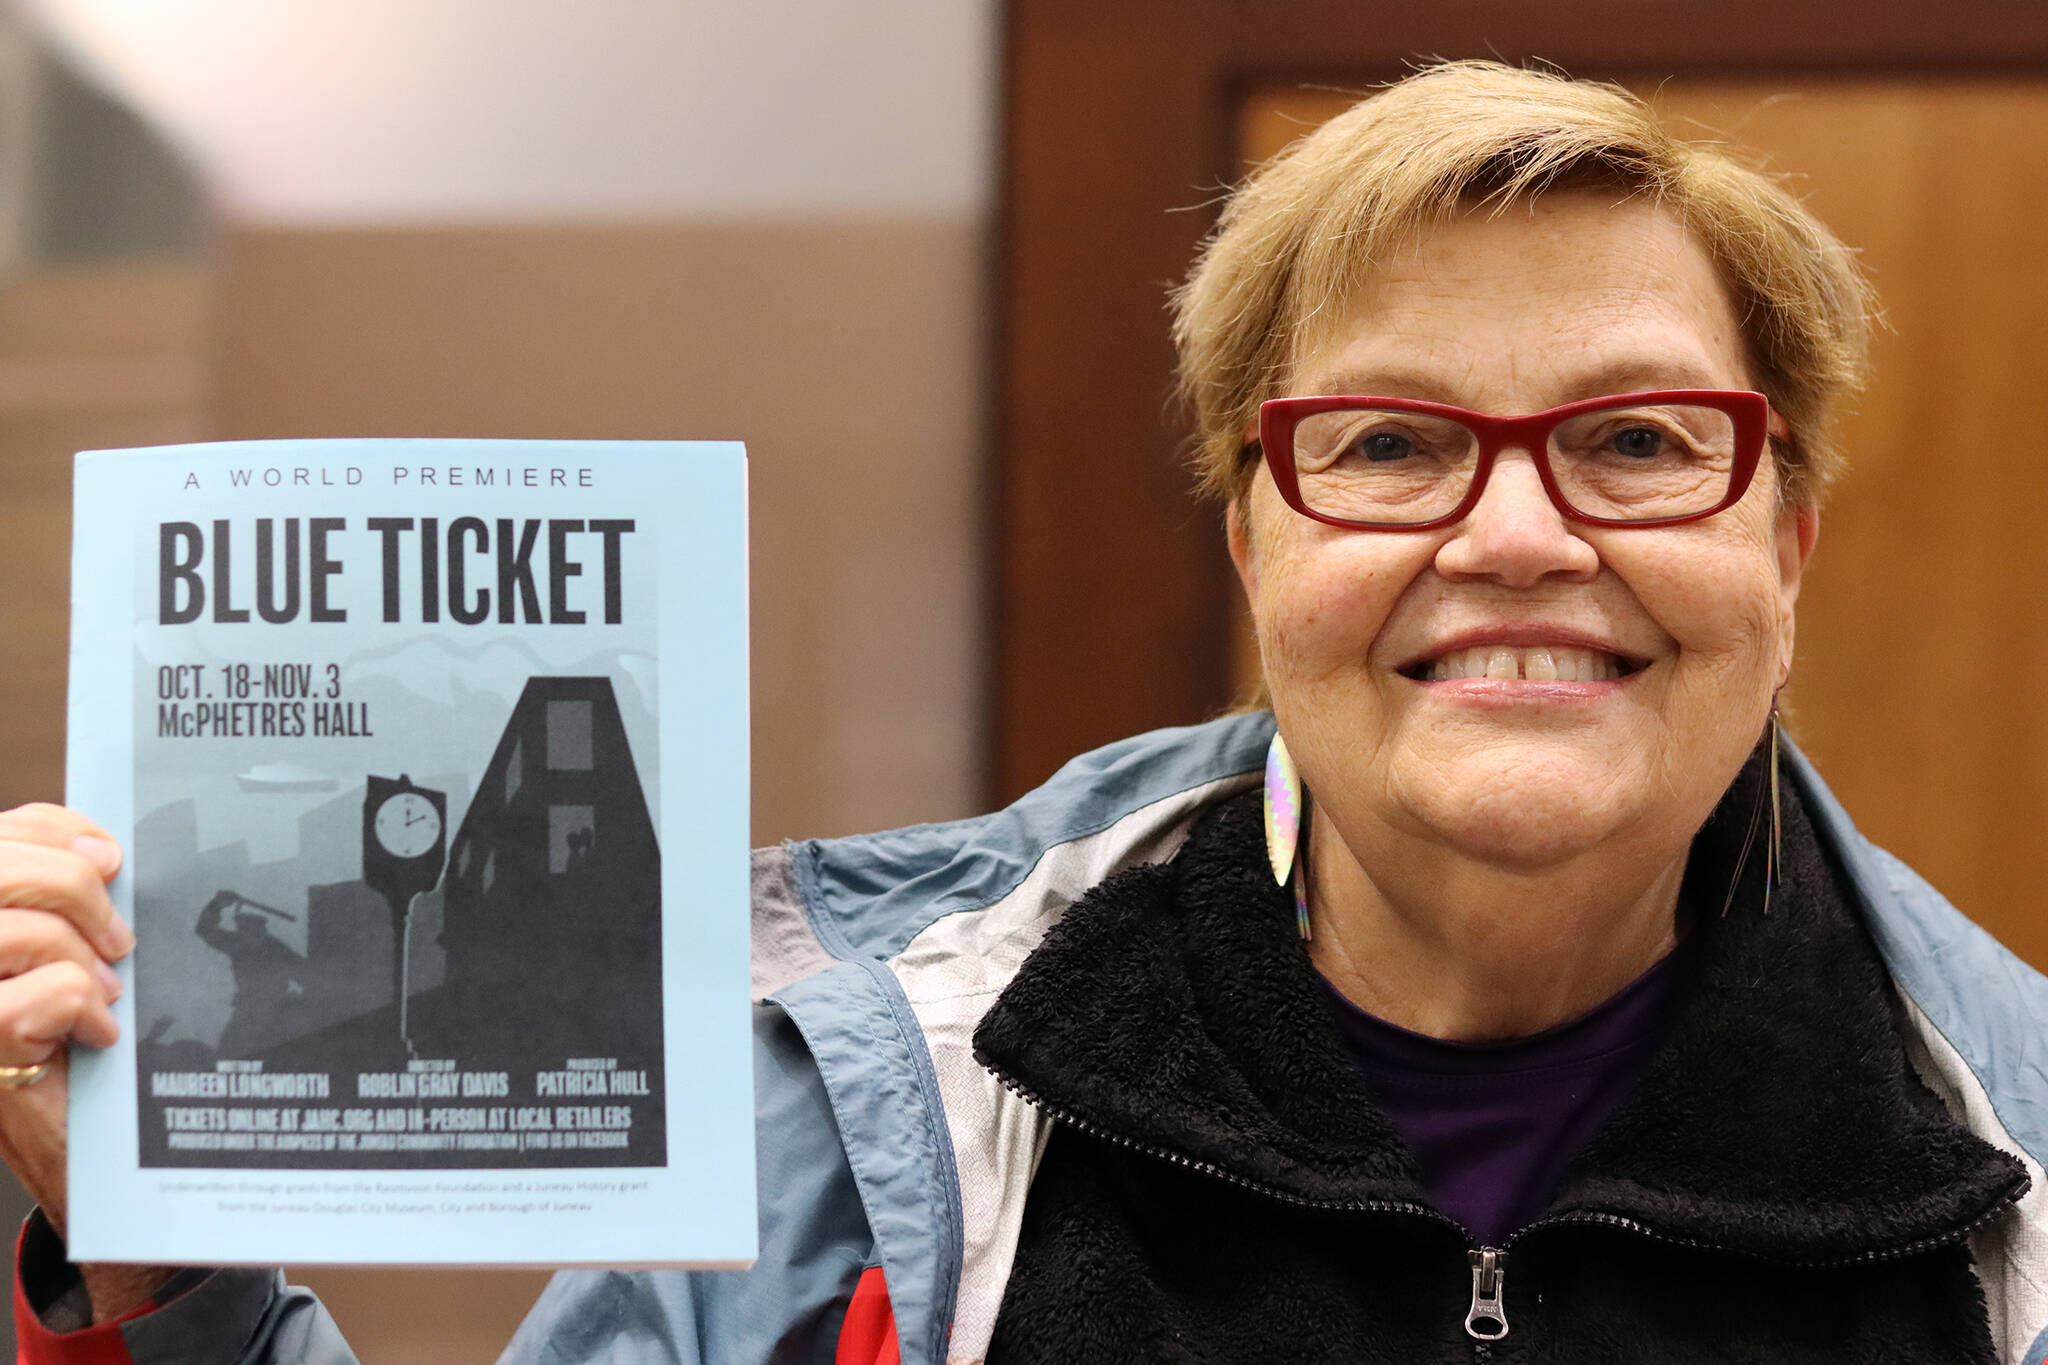 Clarise Larson / Capital City Weekly
Playwright Maureen Longworth holds up a playbill for “Blue Ticket.” The play, which tells a story inspired by stories from Juneau’s past shared with Longworth, is making its on-screen debut during Pride Month. The play debuted on stage in 2019.